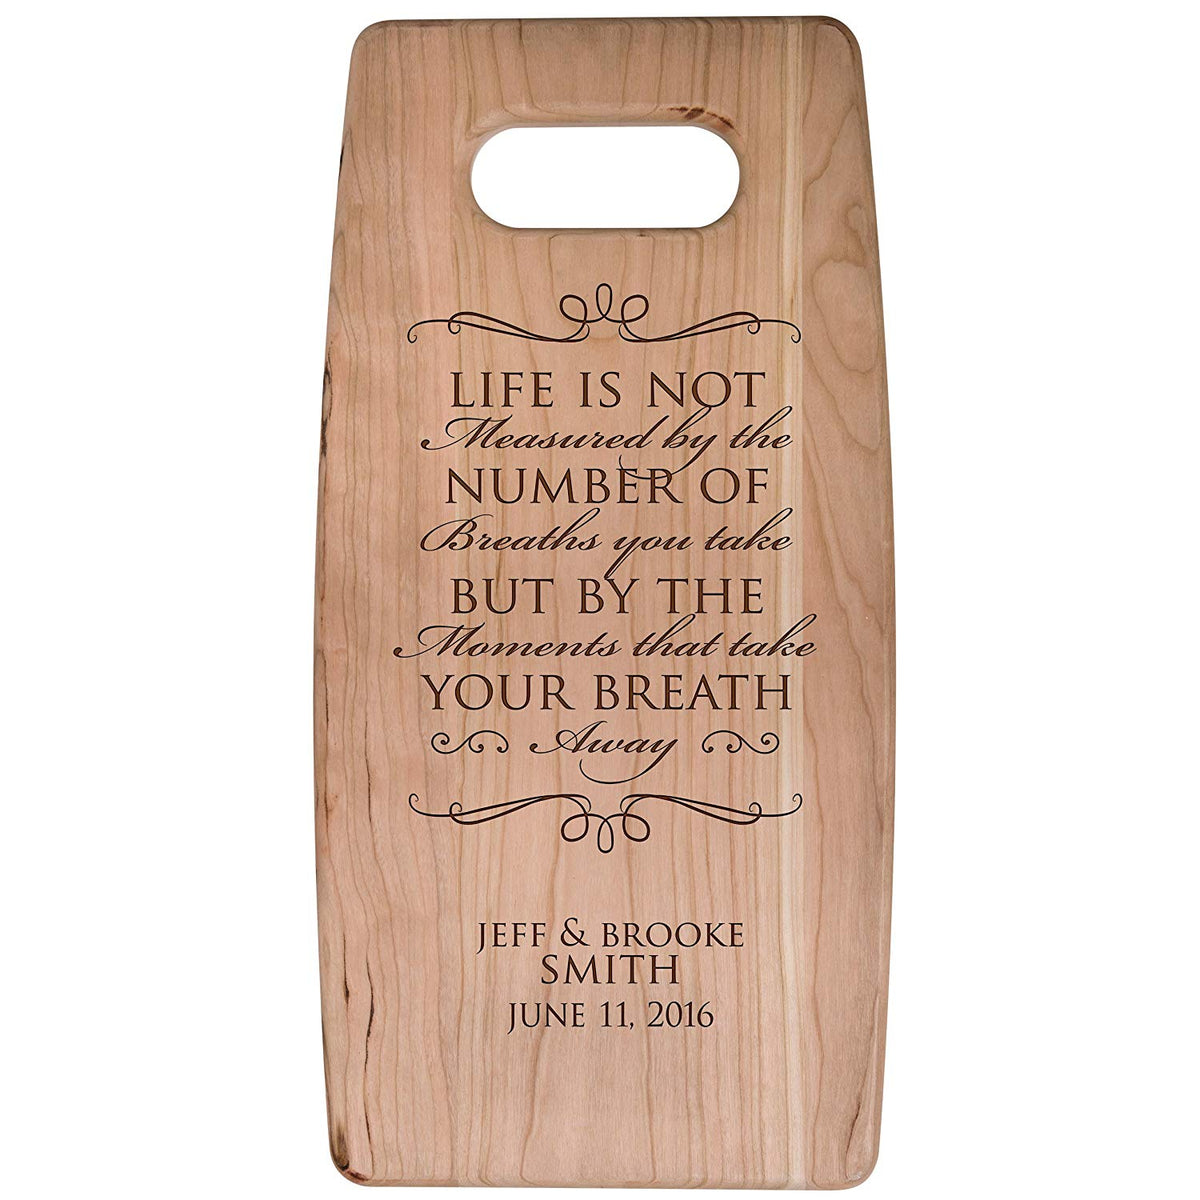 Personalized Cherry Cutting Board - Life Is Not Measured - LifeSong Milestones